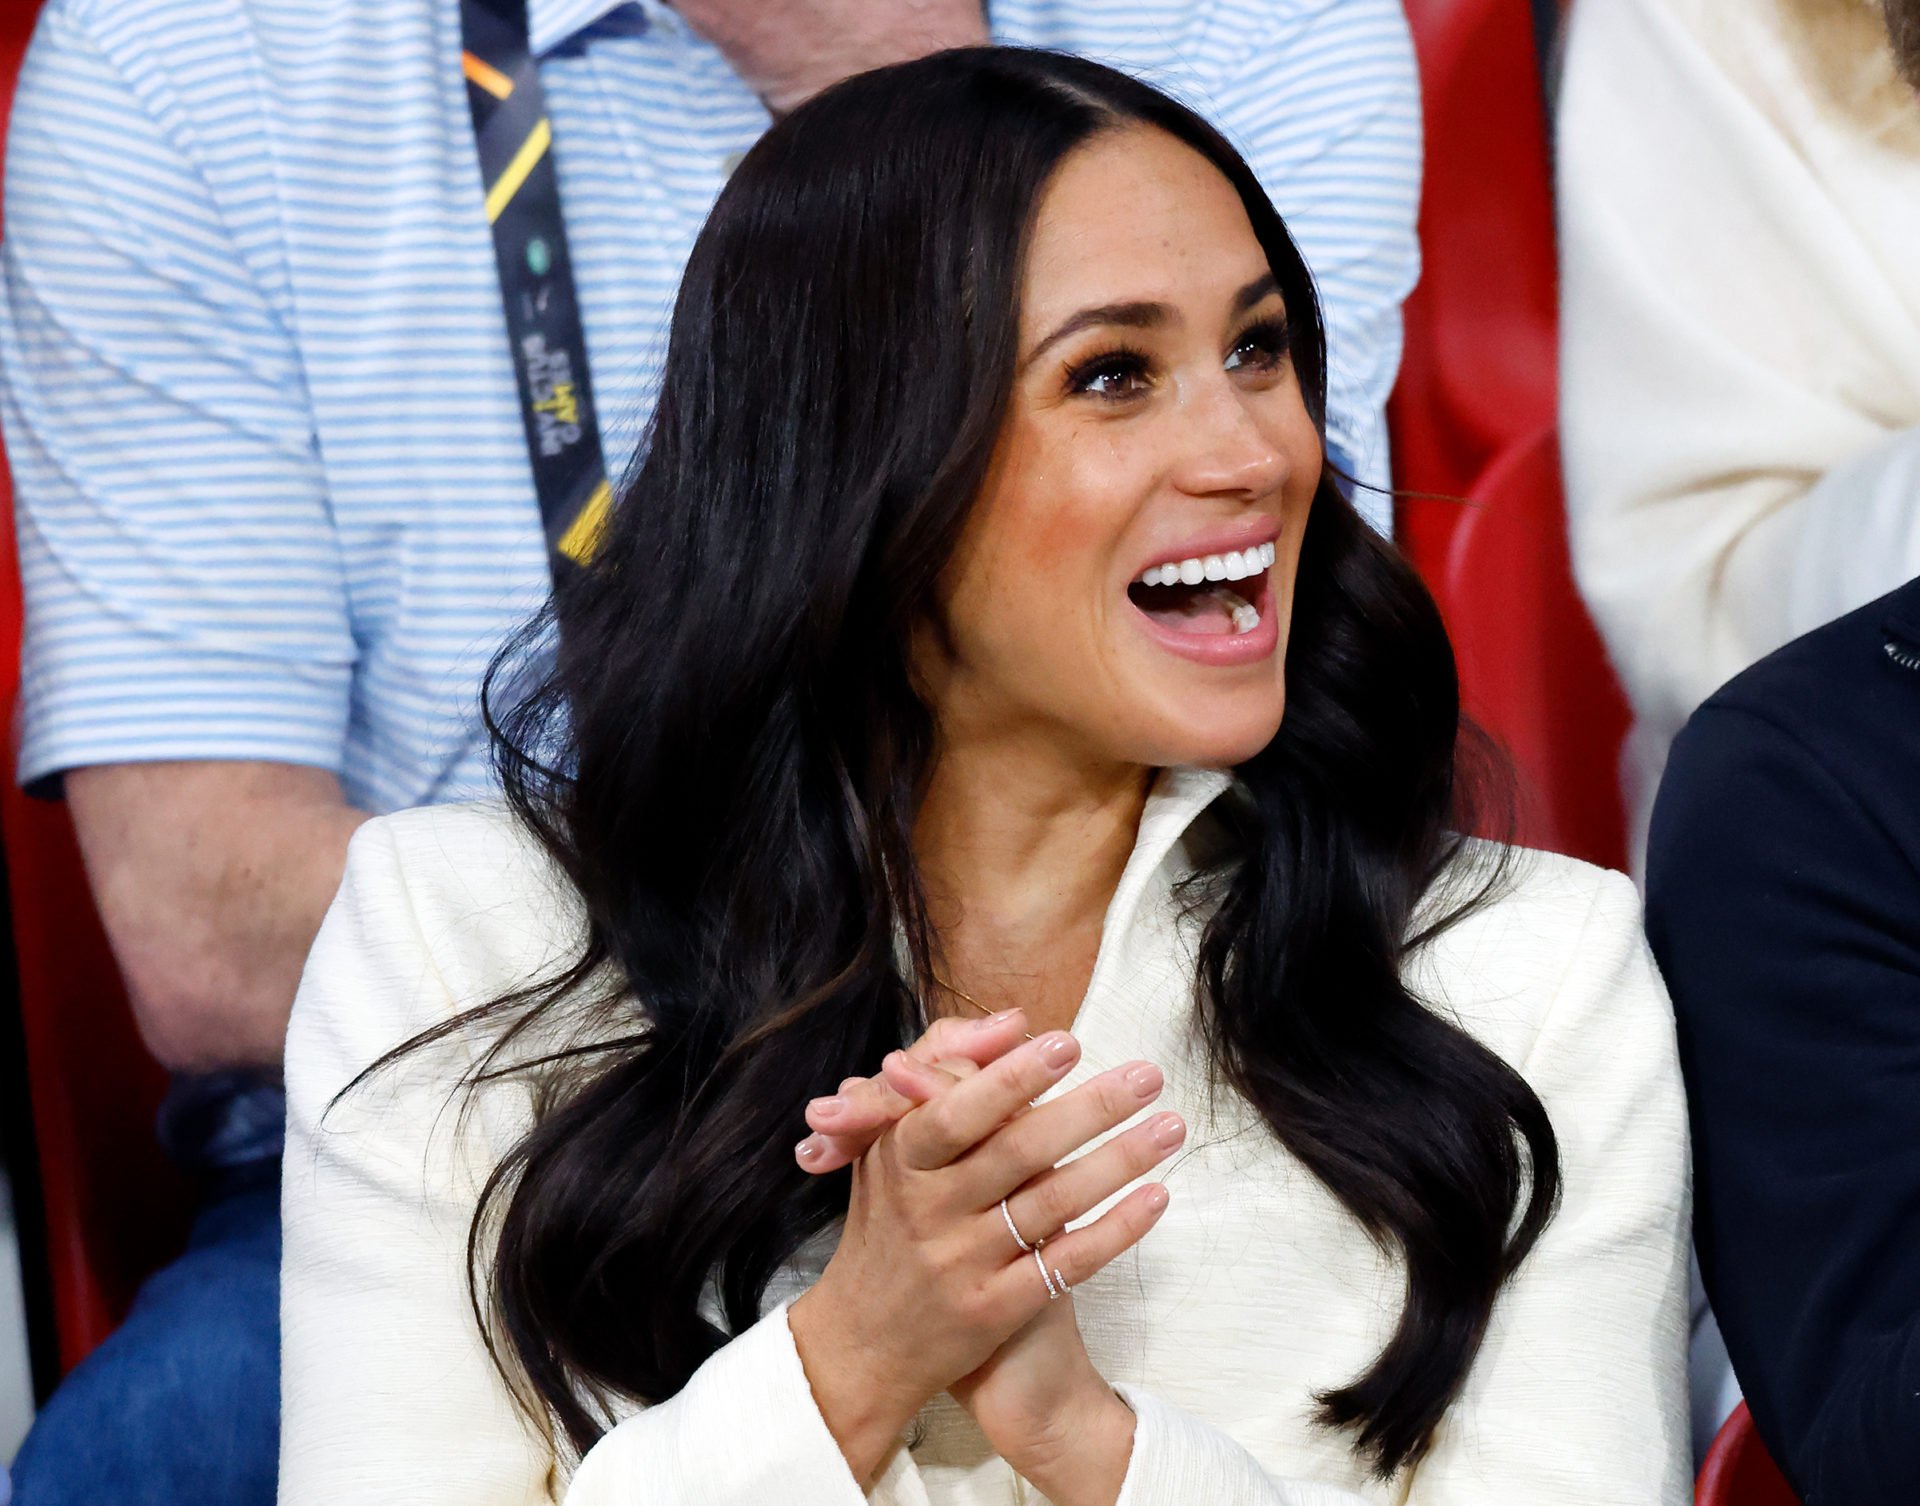 Meghan Markle keeps low profile after not wearing wedding ring